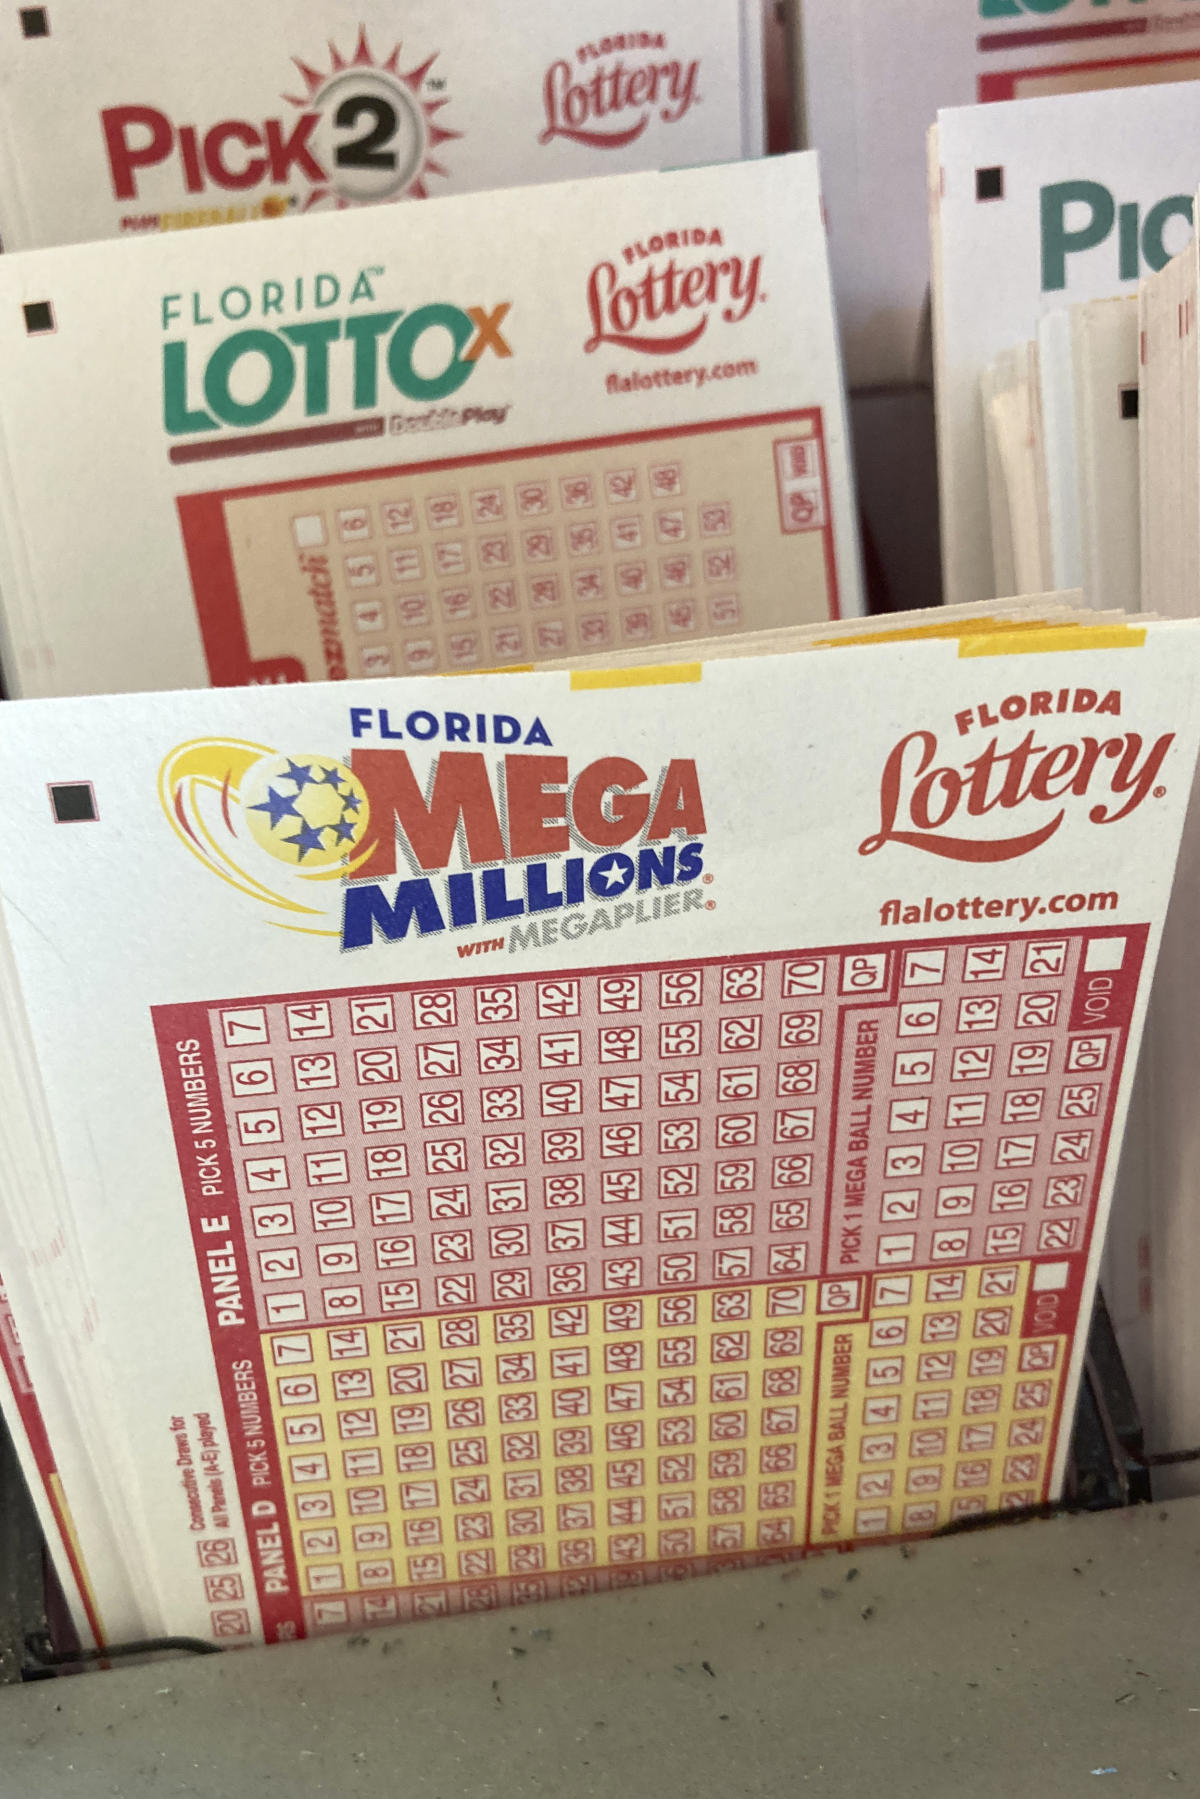 5M Mega Millions prize is 6th largest in U.S. history